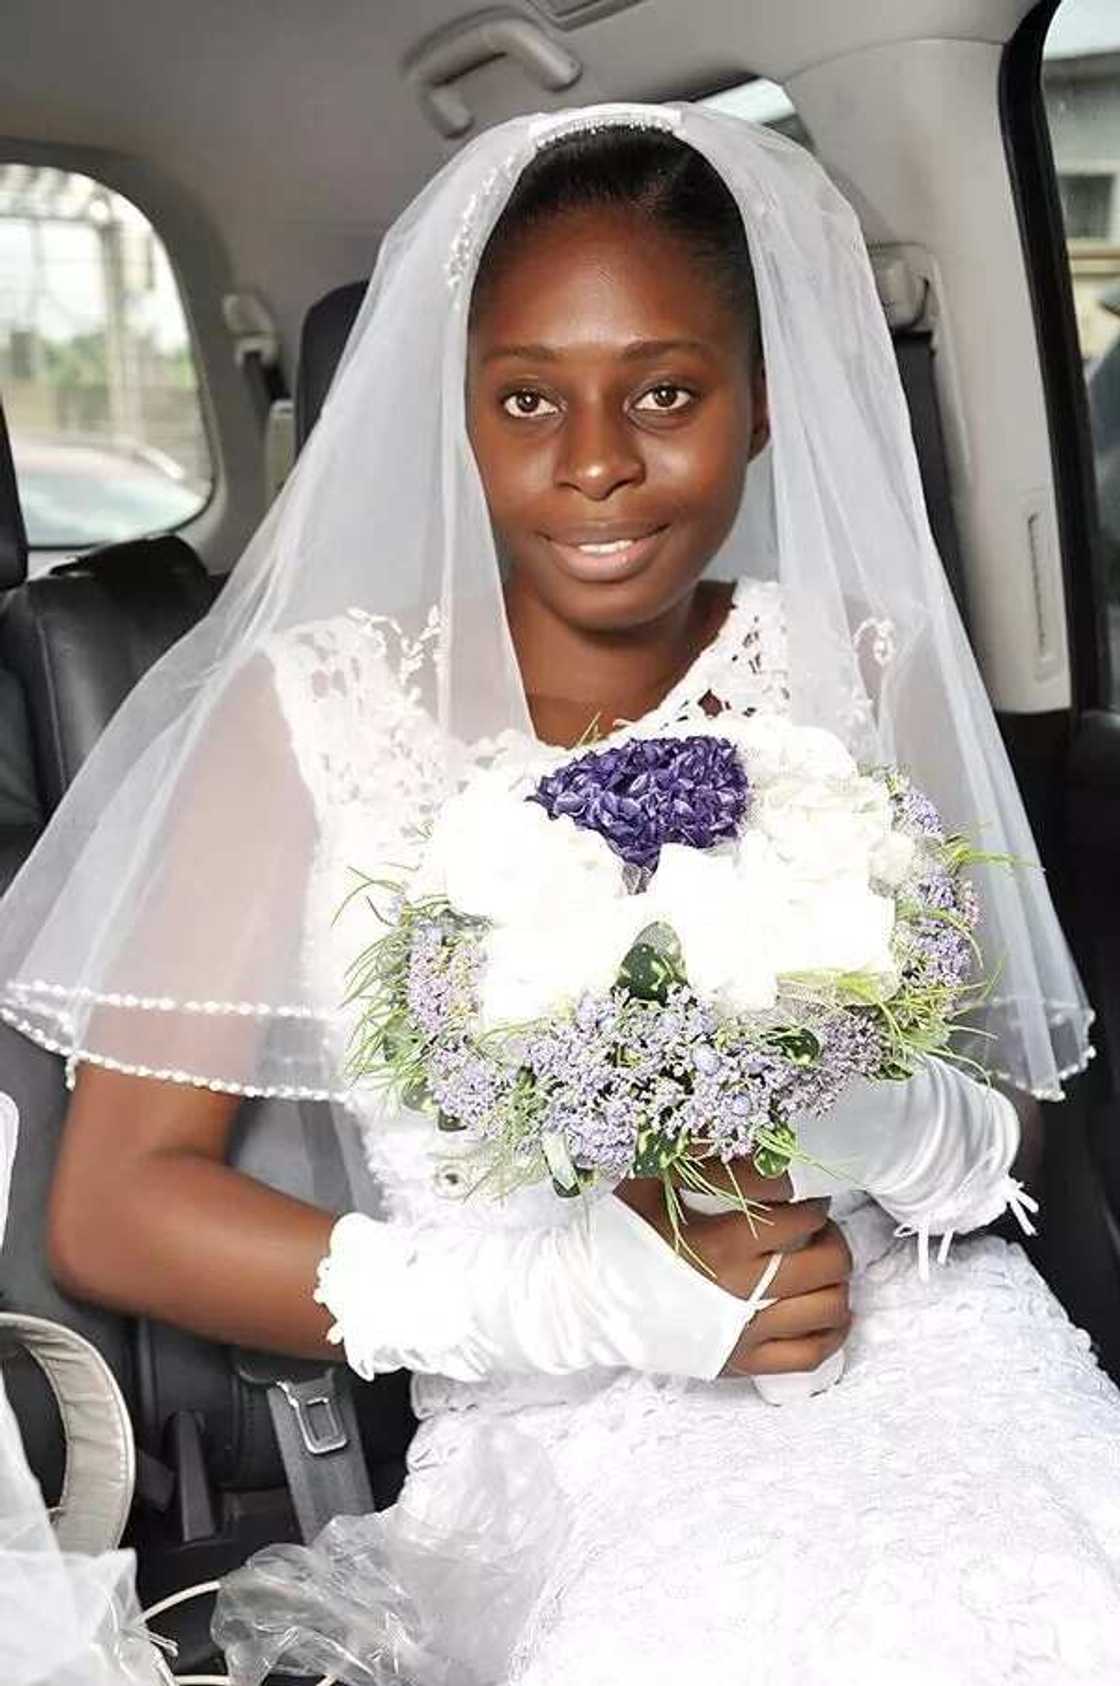 Bride who wore no makeup to her wedding speaks out